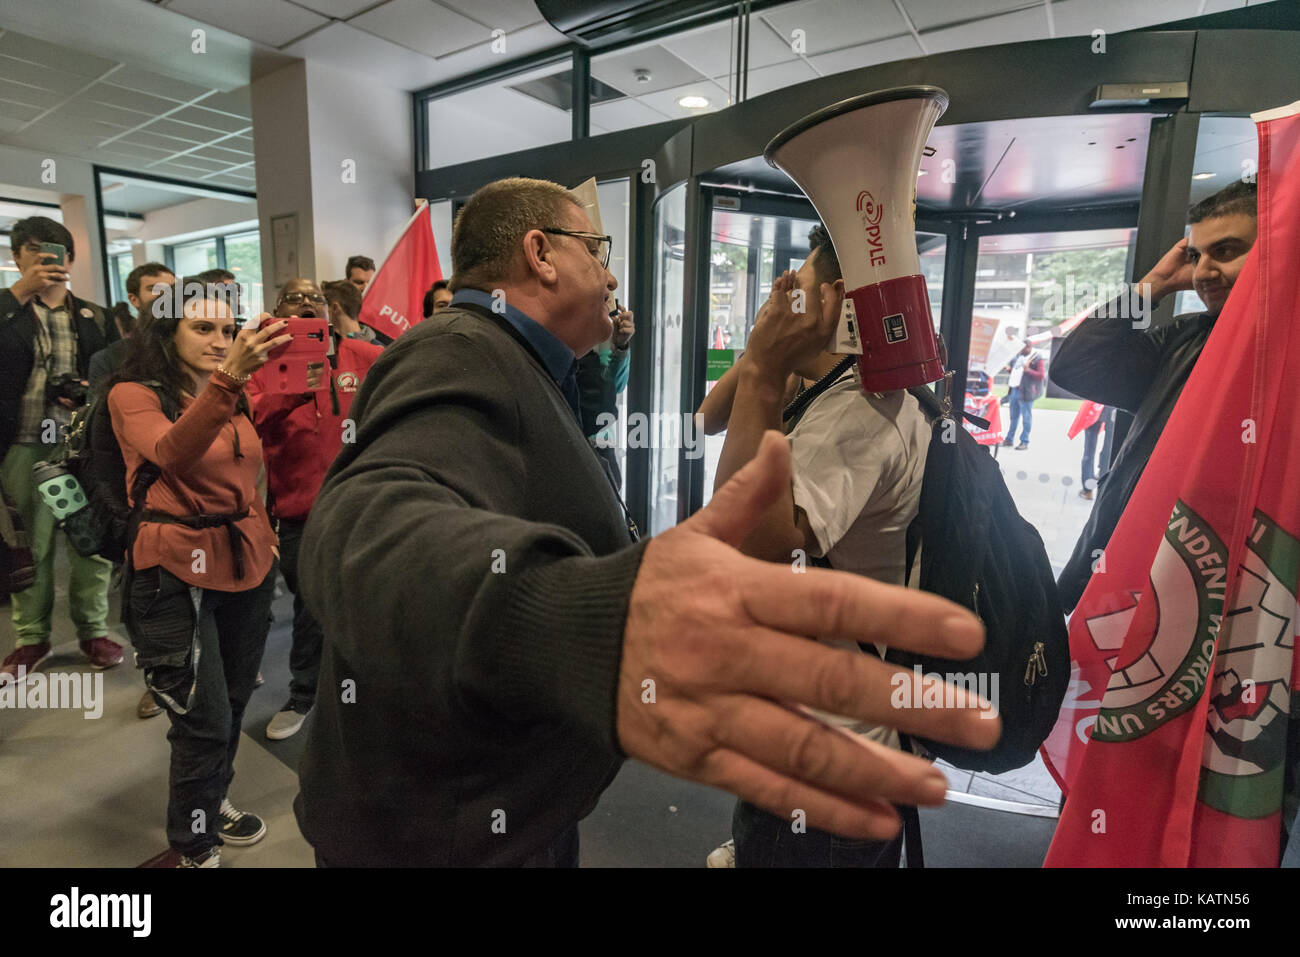 London, UK. 27th Sep, 2017. A security man tells Independent Workers Union of Great Britain President Henry Chango Lopez that the protesters must leave the lobby of Birkbeck College where they are holding a noisy protest. The workers include security staff who have not received the increases in salary promised to maintain differentials since 2011. Credit: ZUMA Press, Inc./Alamy Live News Stock Photo